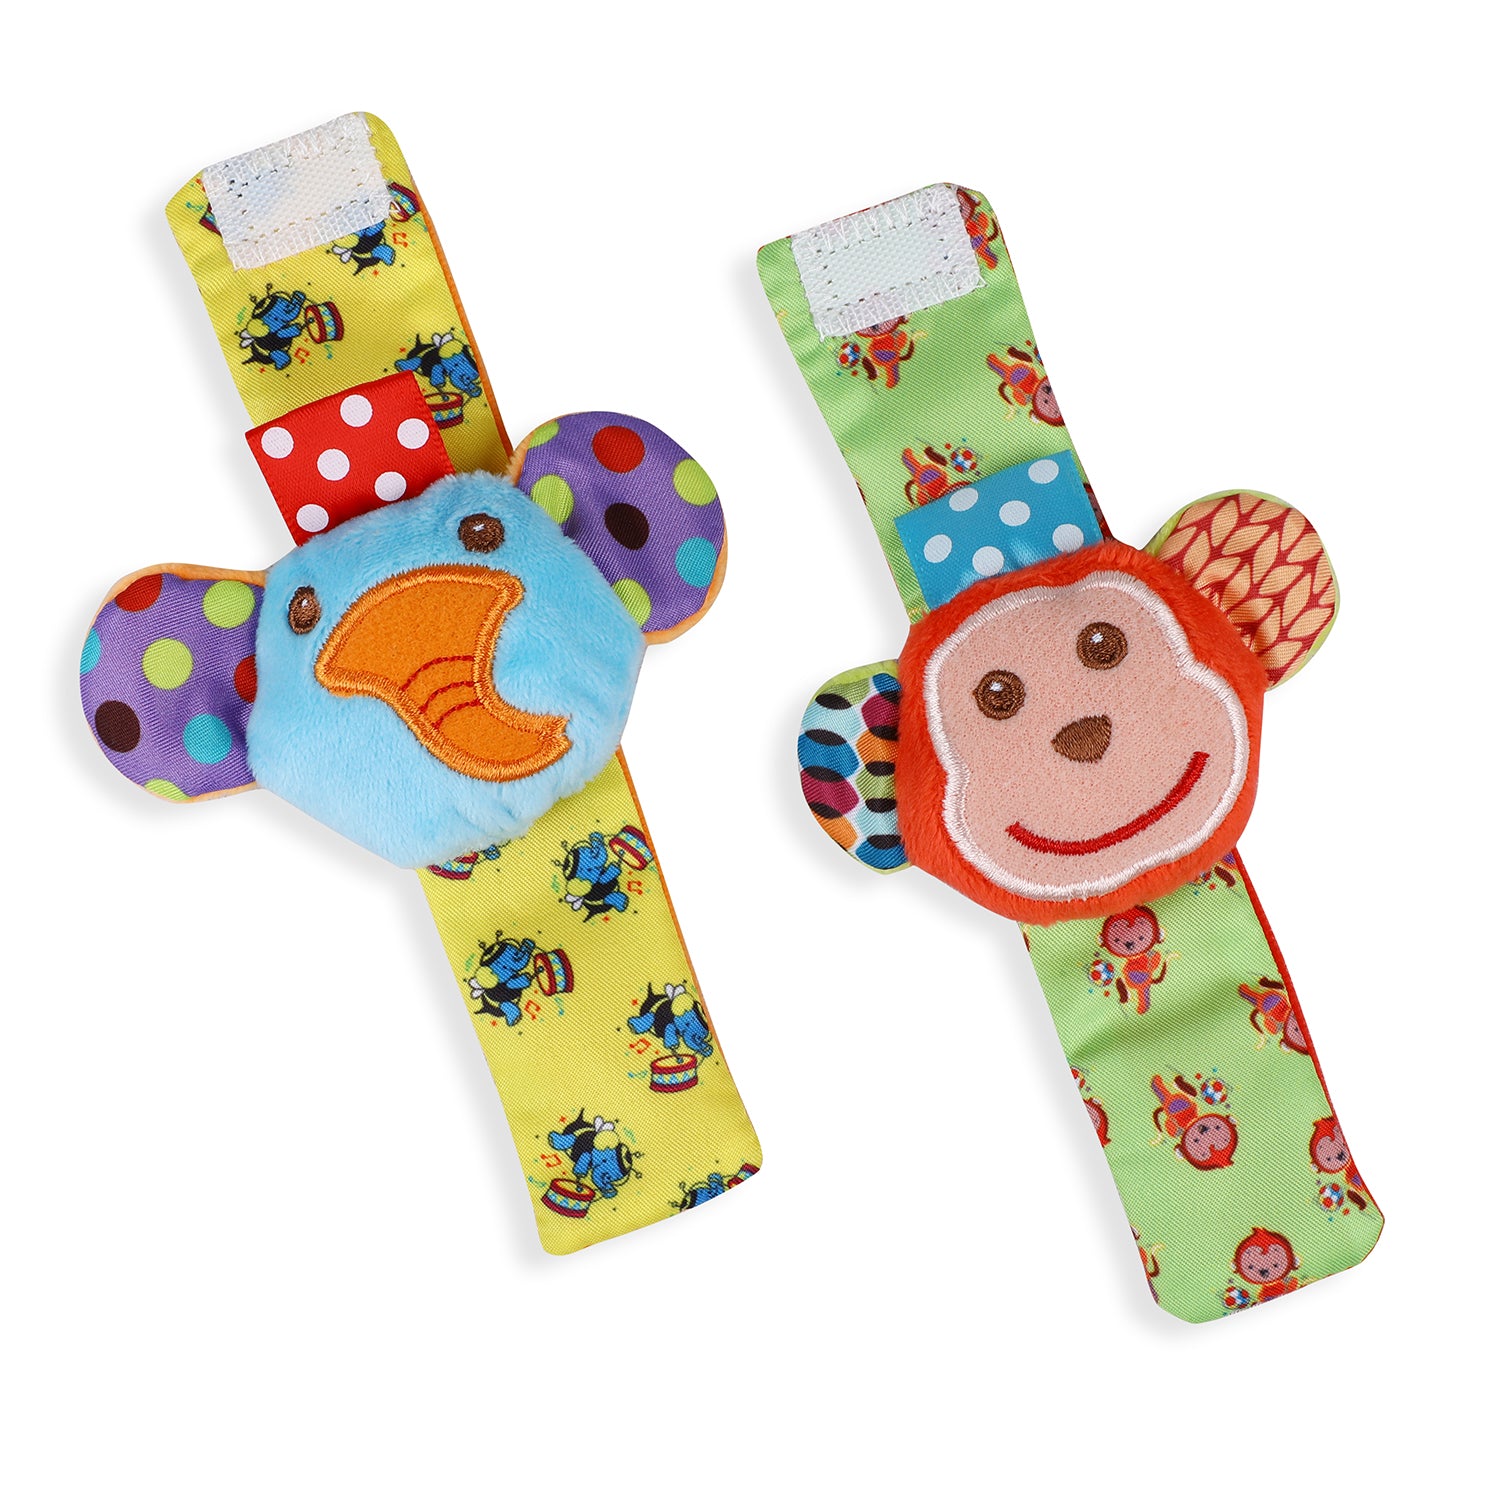 Newborn Play Kit With High Contrast Cards, Toy Rattles And Teethers 6 Items 0-12M - Multicolour - Baby Moo